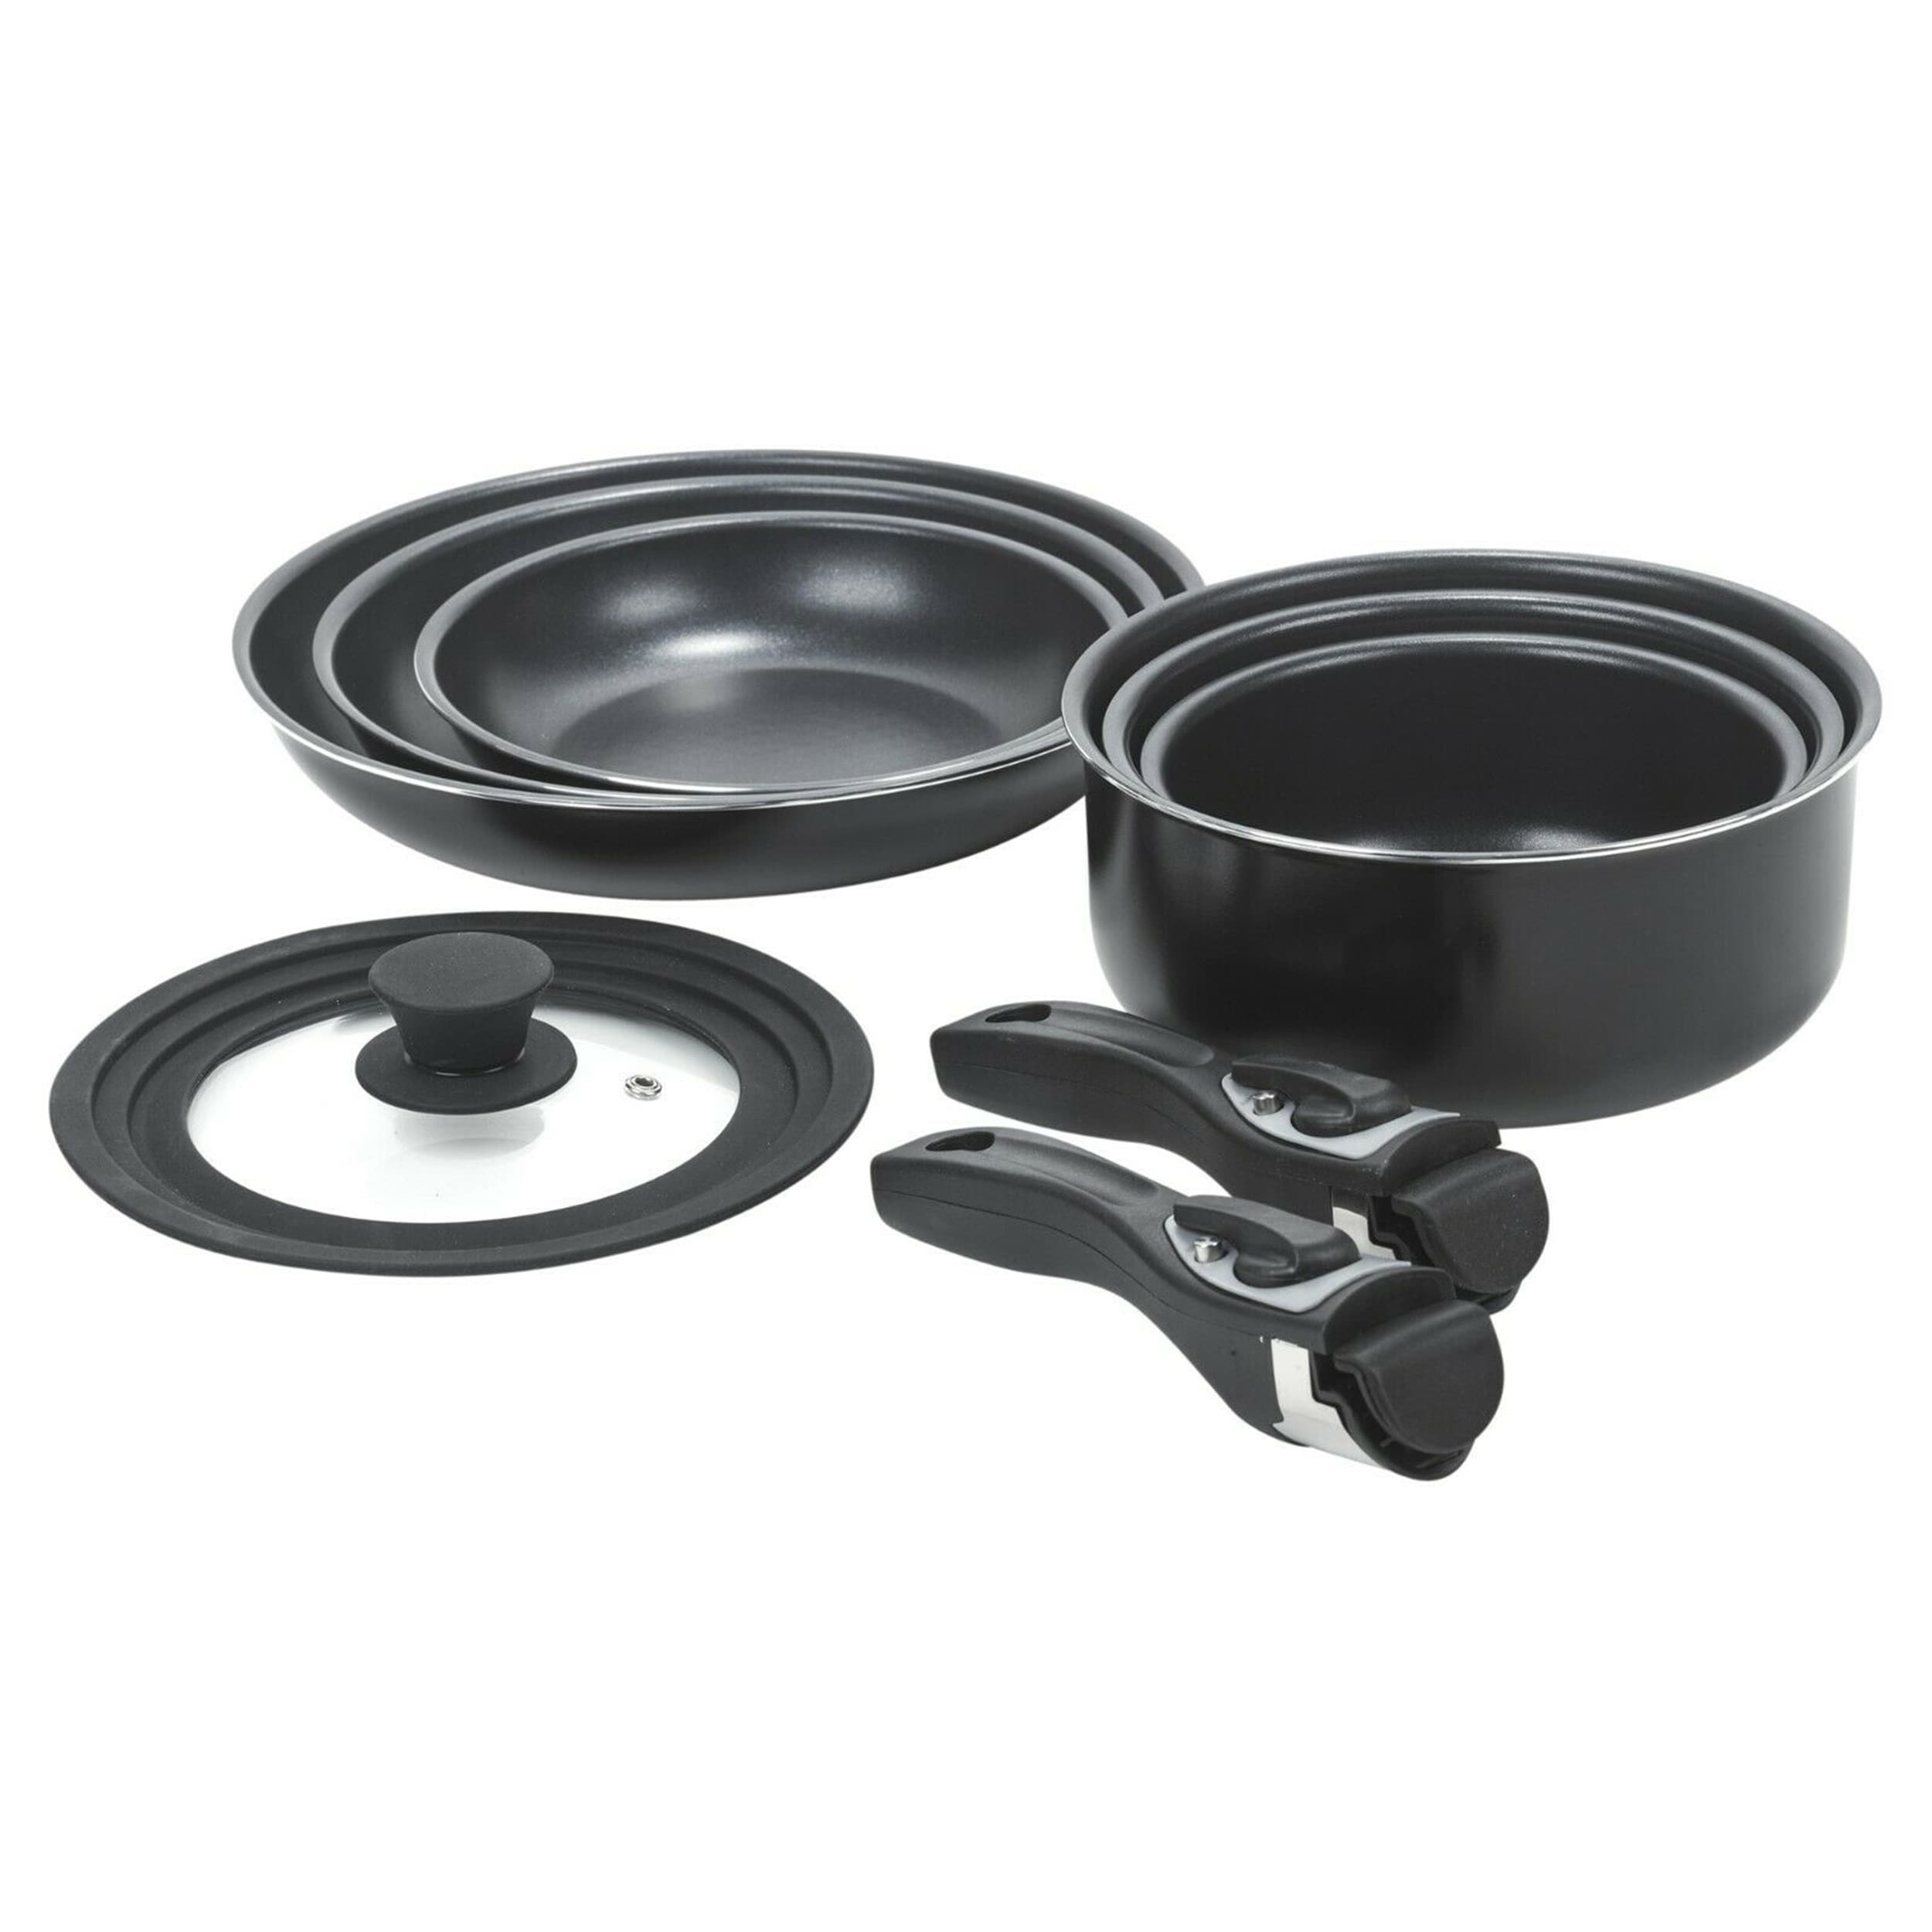 https://ak1.ostkcdn.com/images/products/is/images/direct/9710153b5be49228163e518fef05fa9bb418bd66/9-Piece-Ceramic-Cookware-Pans-Pots-Set-with-Detachable-Handle-and-Lid-Induction.jpg